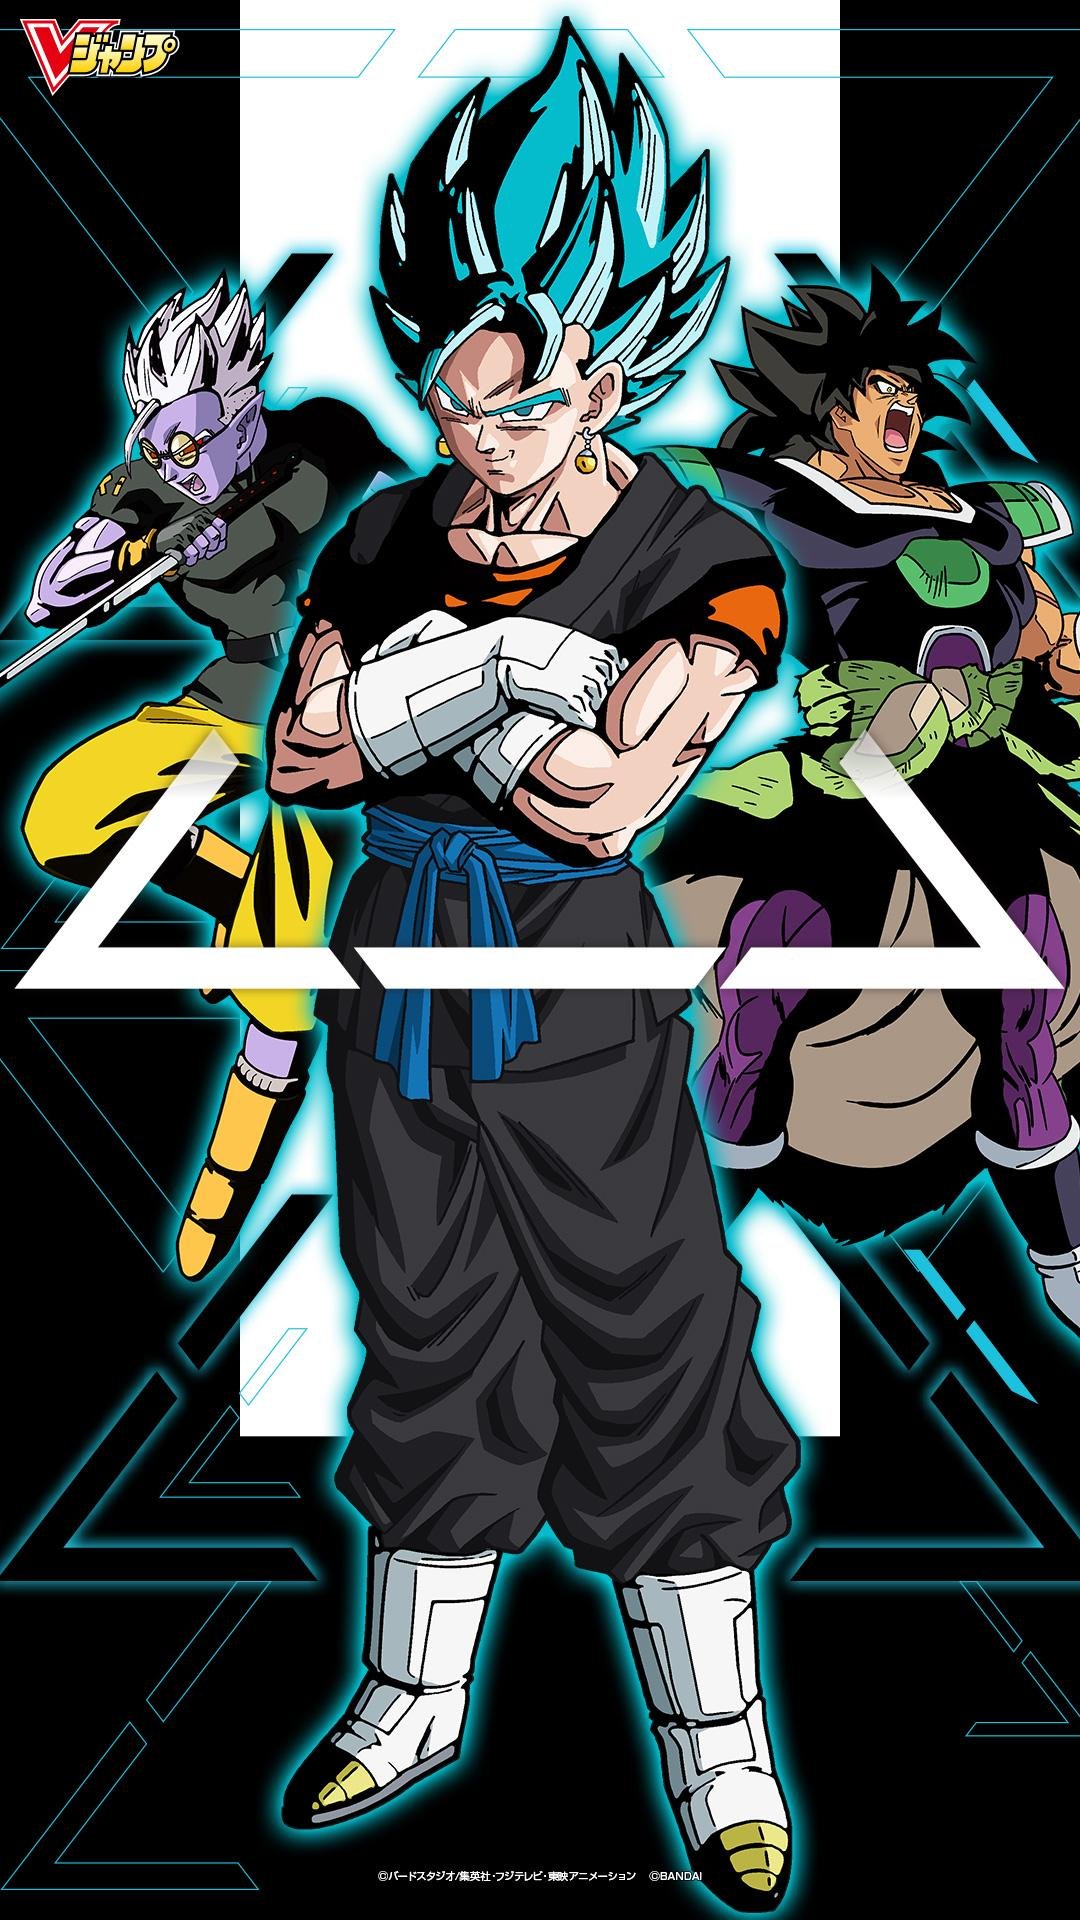 Turles Dragon Ball Z Movie 1 Dead Zone Android 2K wallpaper download